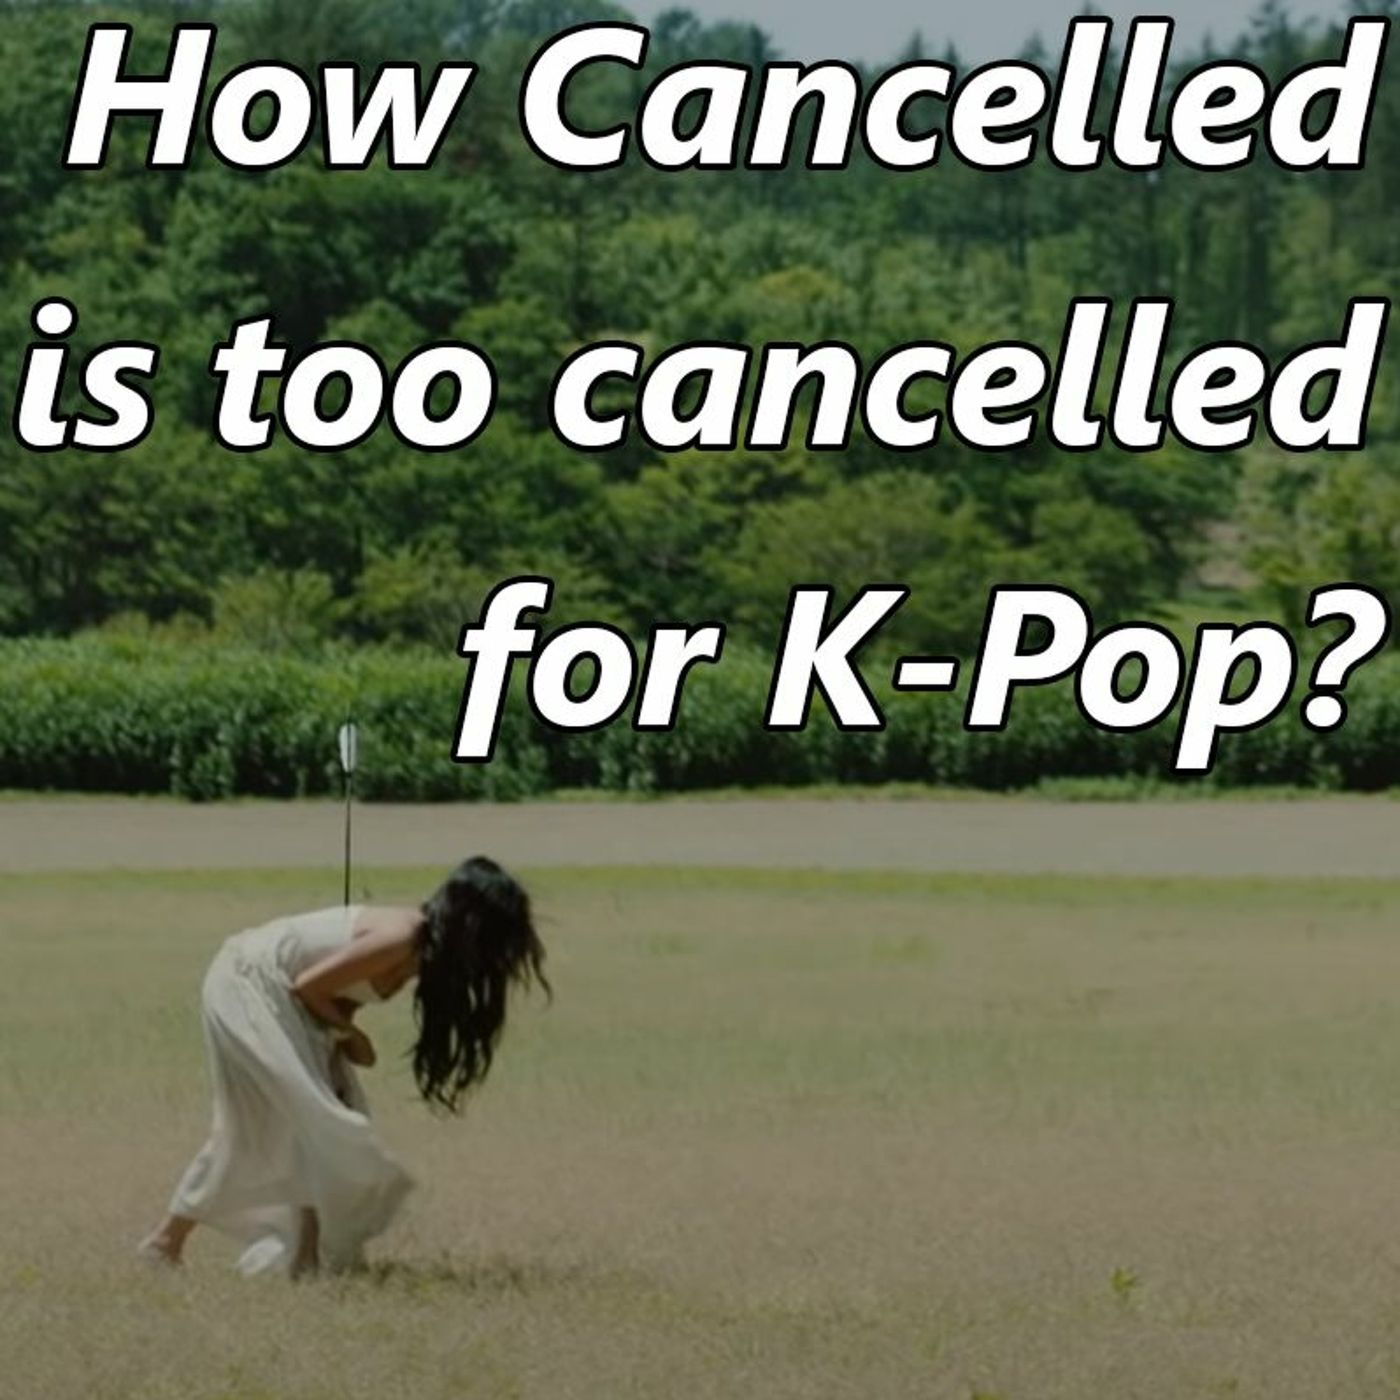 How Cancelled is too cancelled for K-pop?